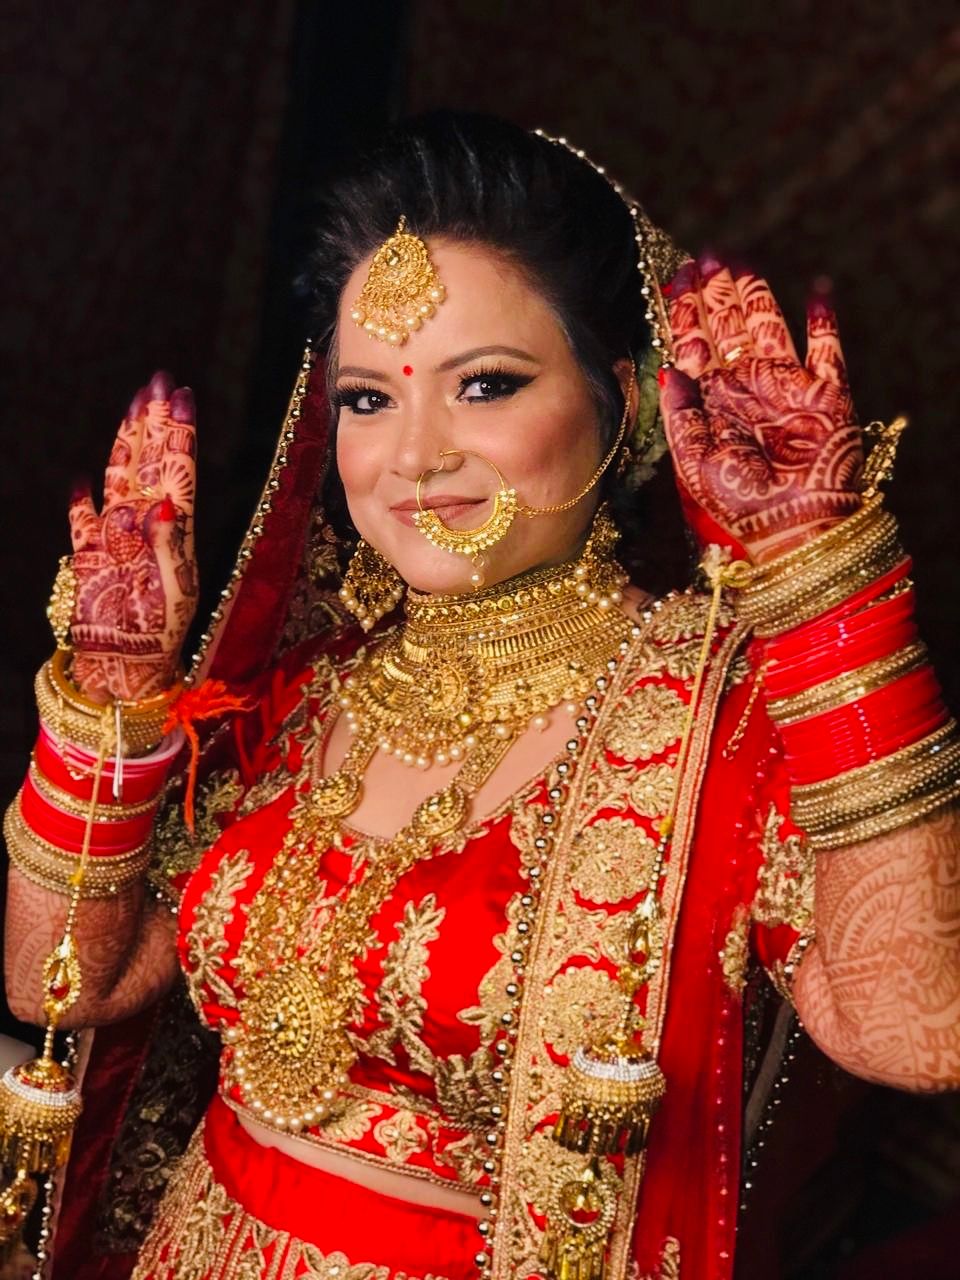 Photo By Savneet Gujral Makeovers - Bridal Makeup